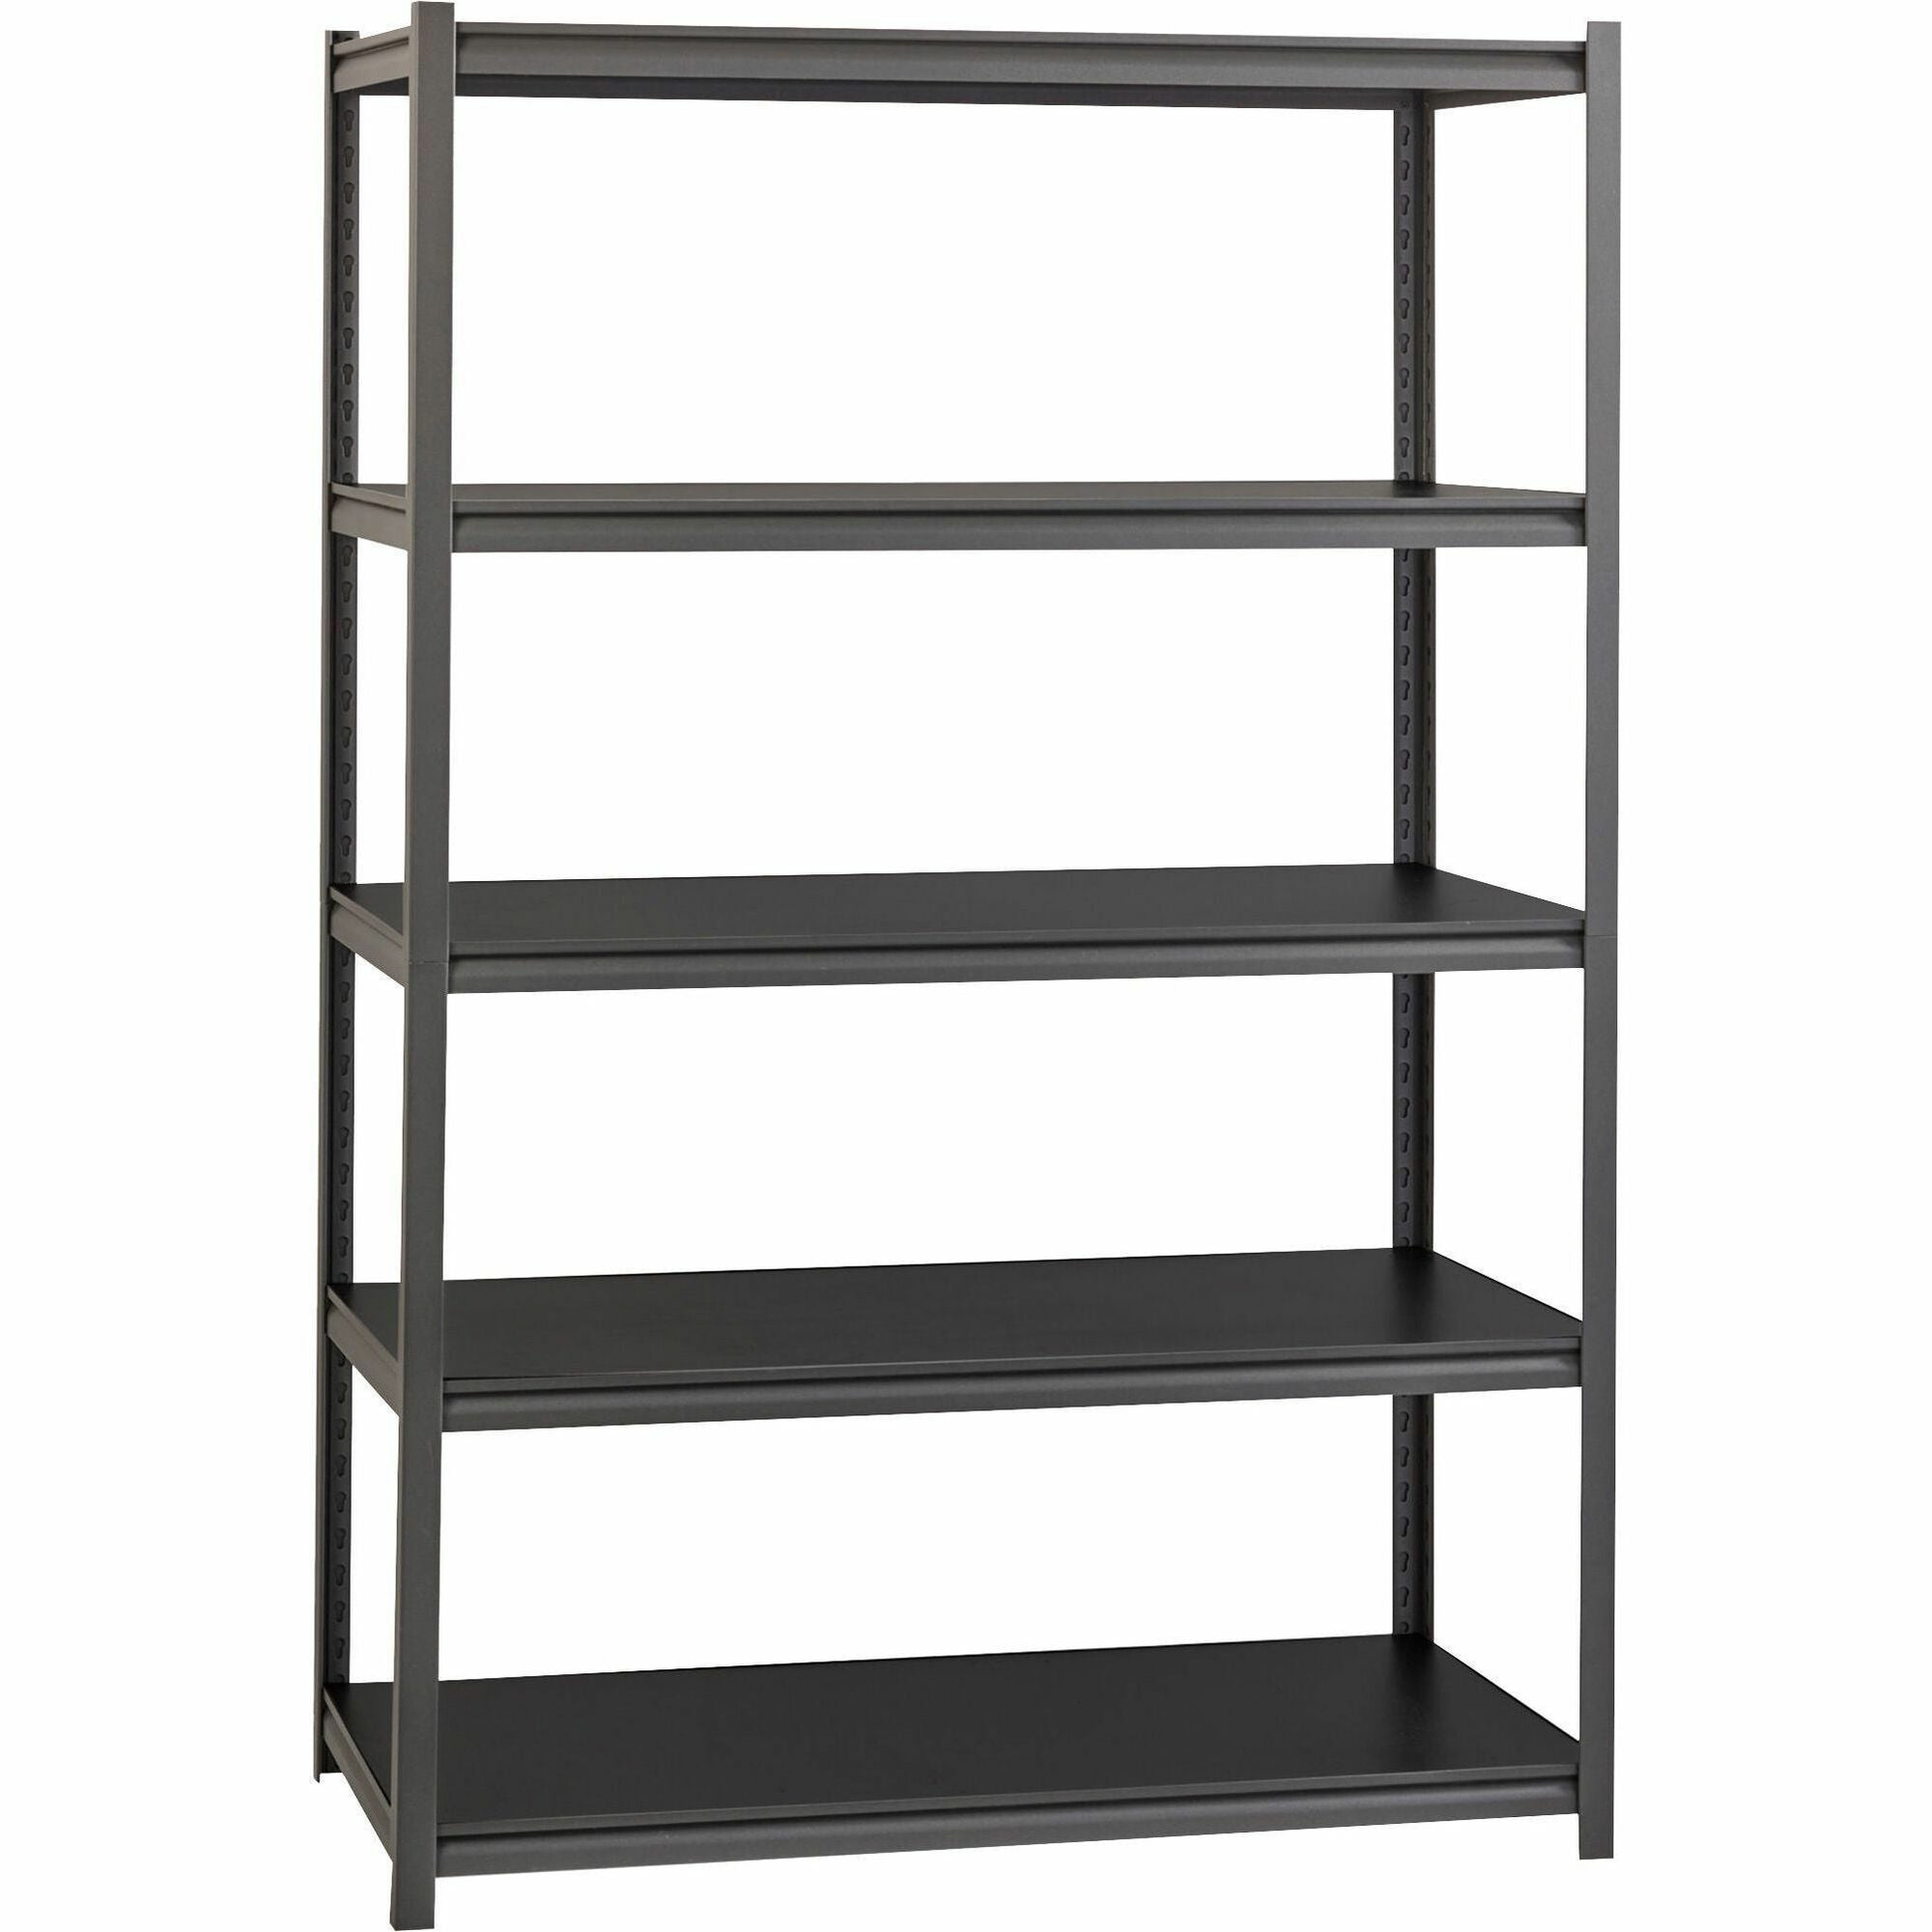 Lorell Iron Horse 3200 lb Capacity Riveted Shelving - 5 Shelf(ves) - 72" Height x 48" Width x 24" Depth - 30% Recycled - Black - Steel, Laminate - 1 Each - 1